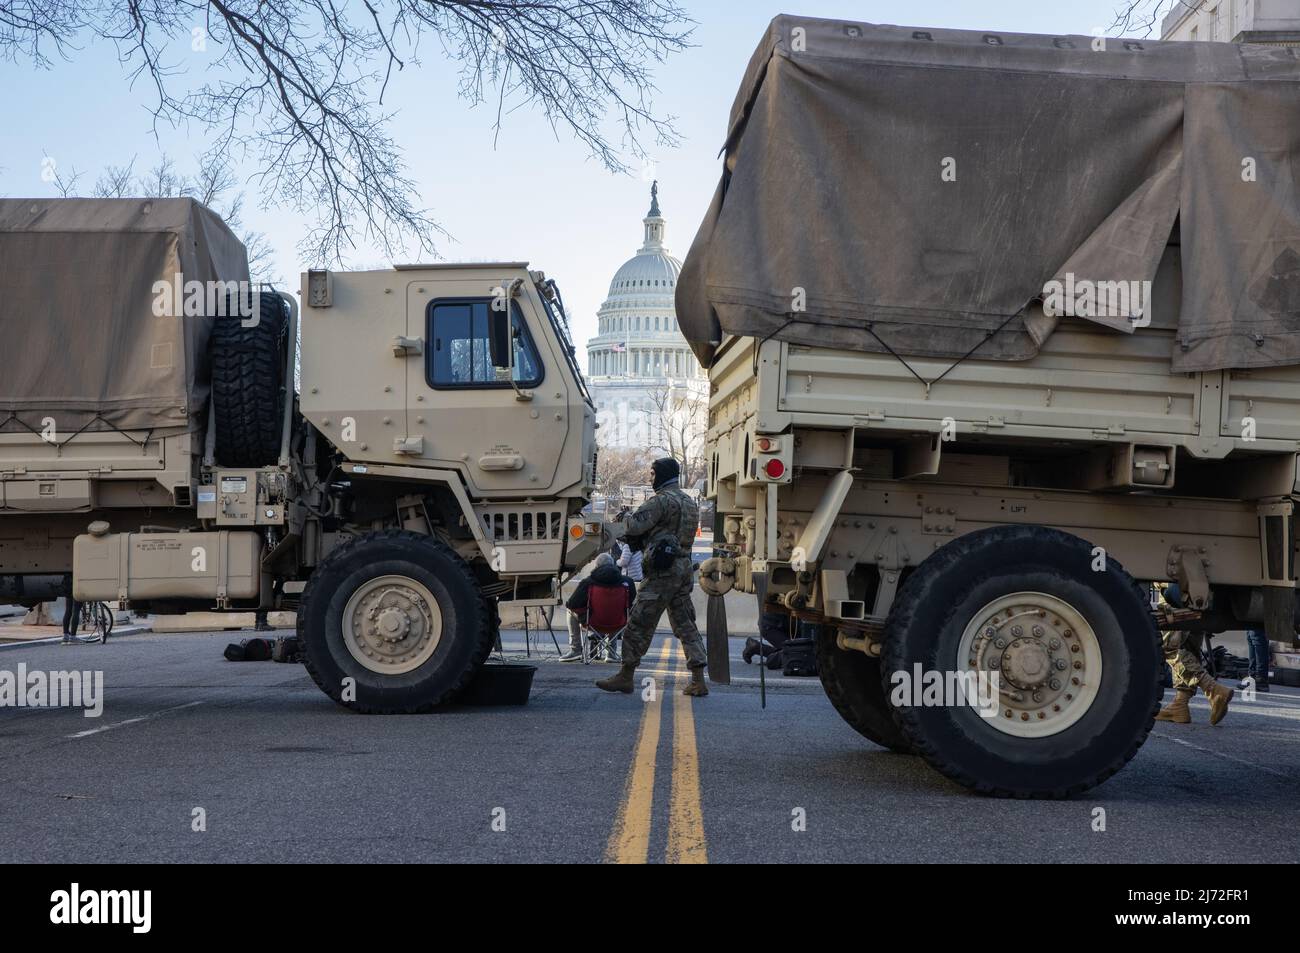 WASHINGTON, D.C. – January 19, 2021: A member of the District of Columbia National Guard is seen near the United States Capitol. Stock Photo